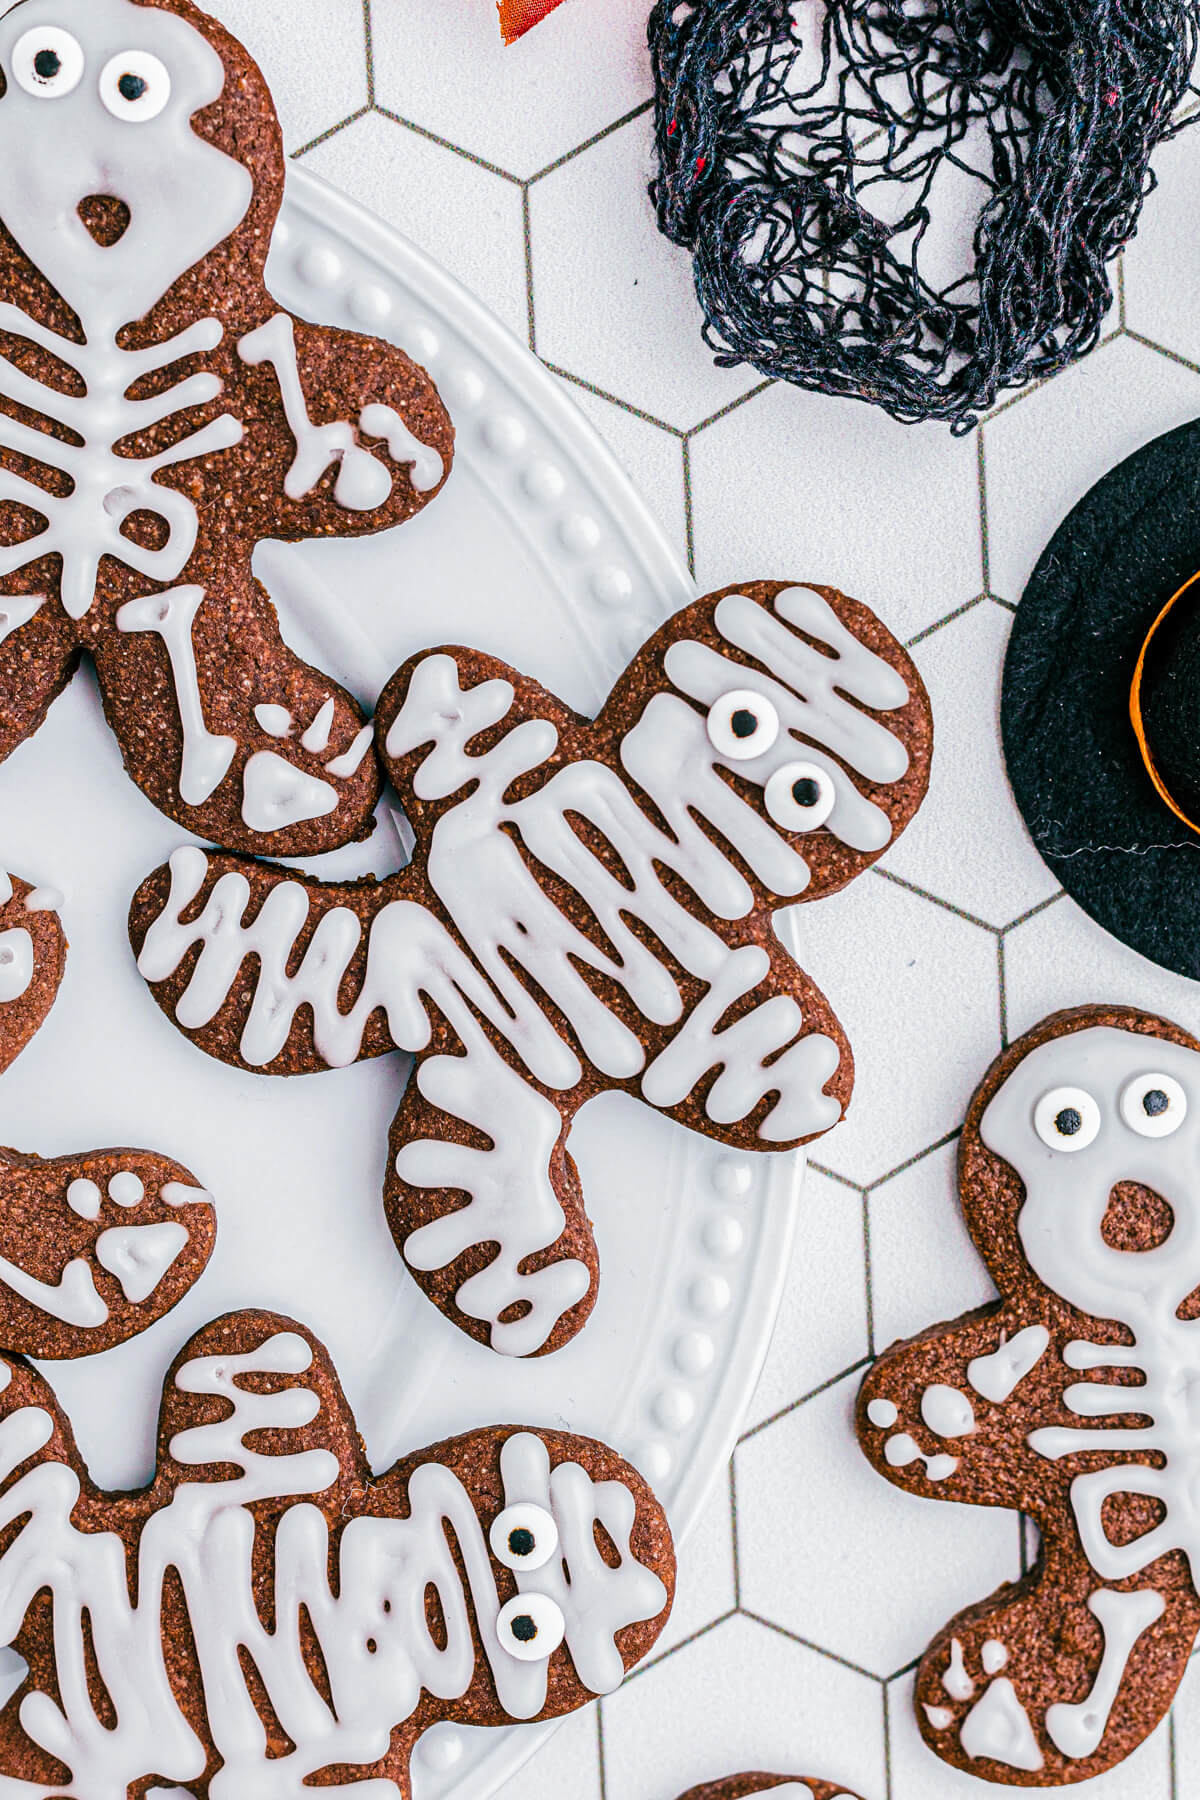 A platter of Chocolate Halloween Sugar Cookies decorated as mummies and skeletons.